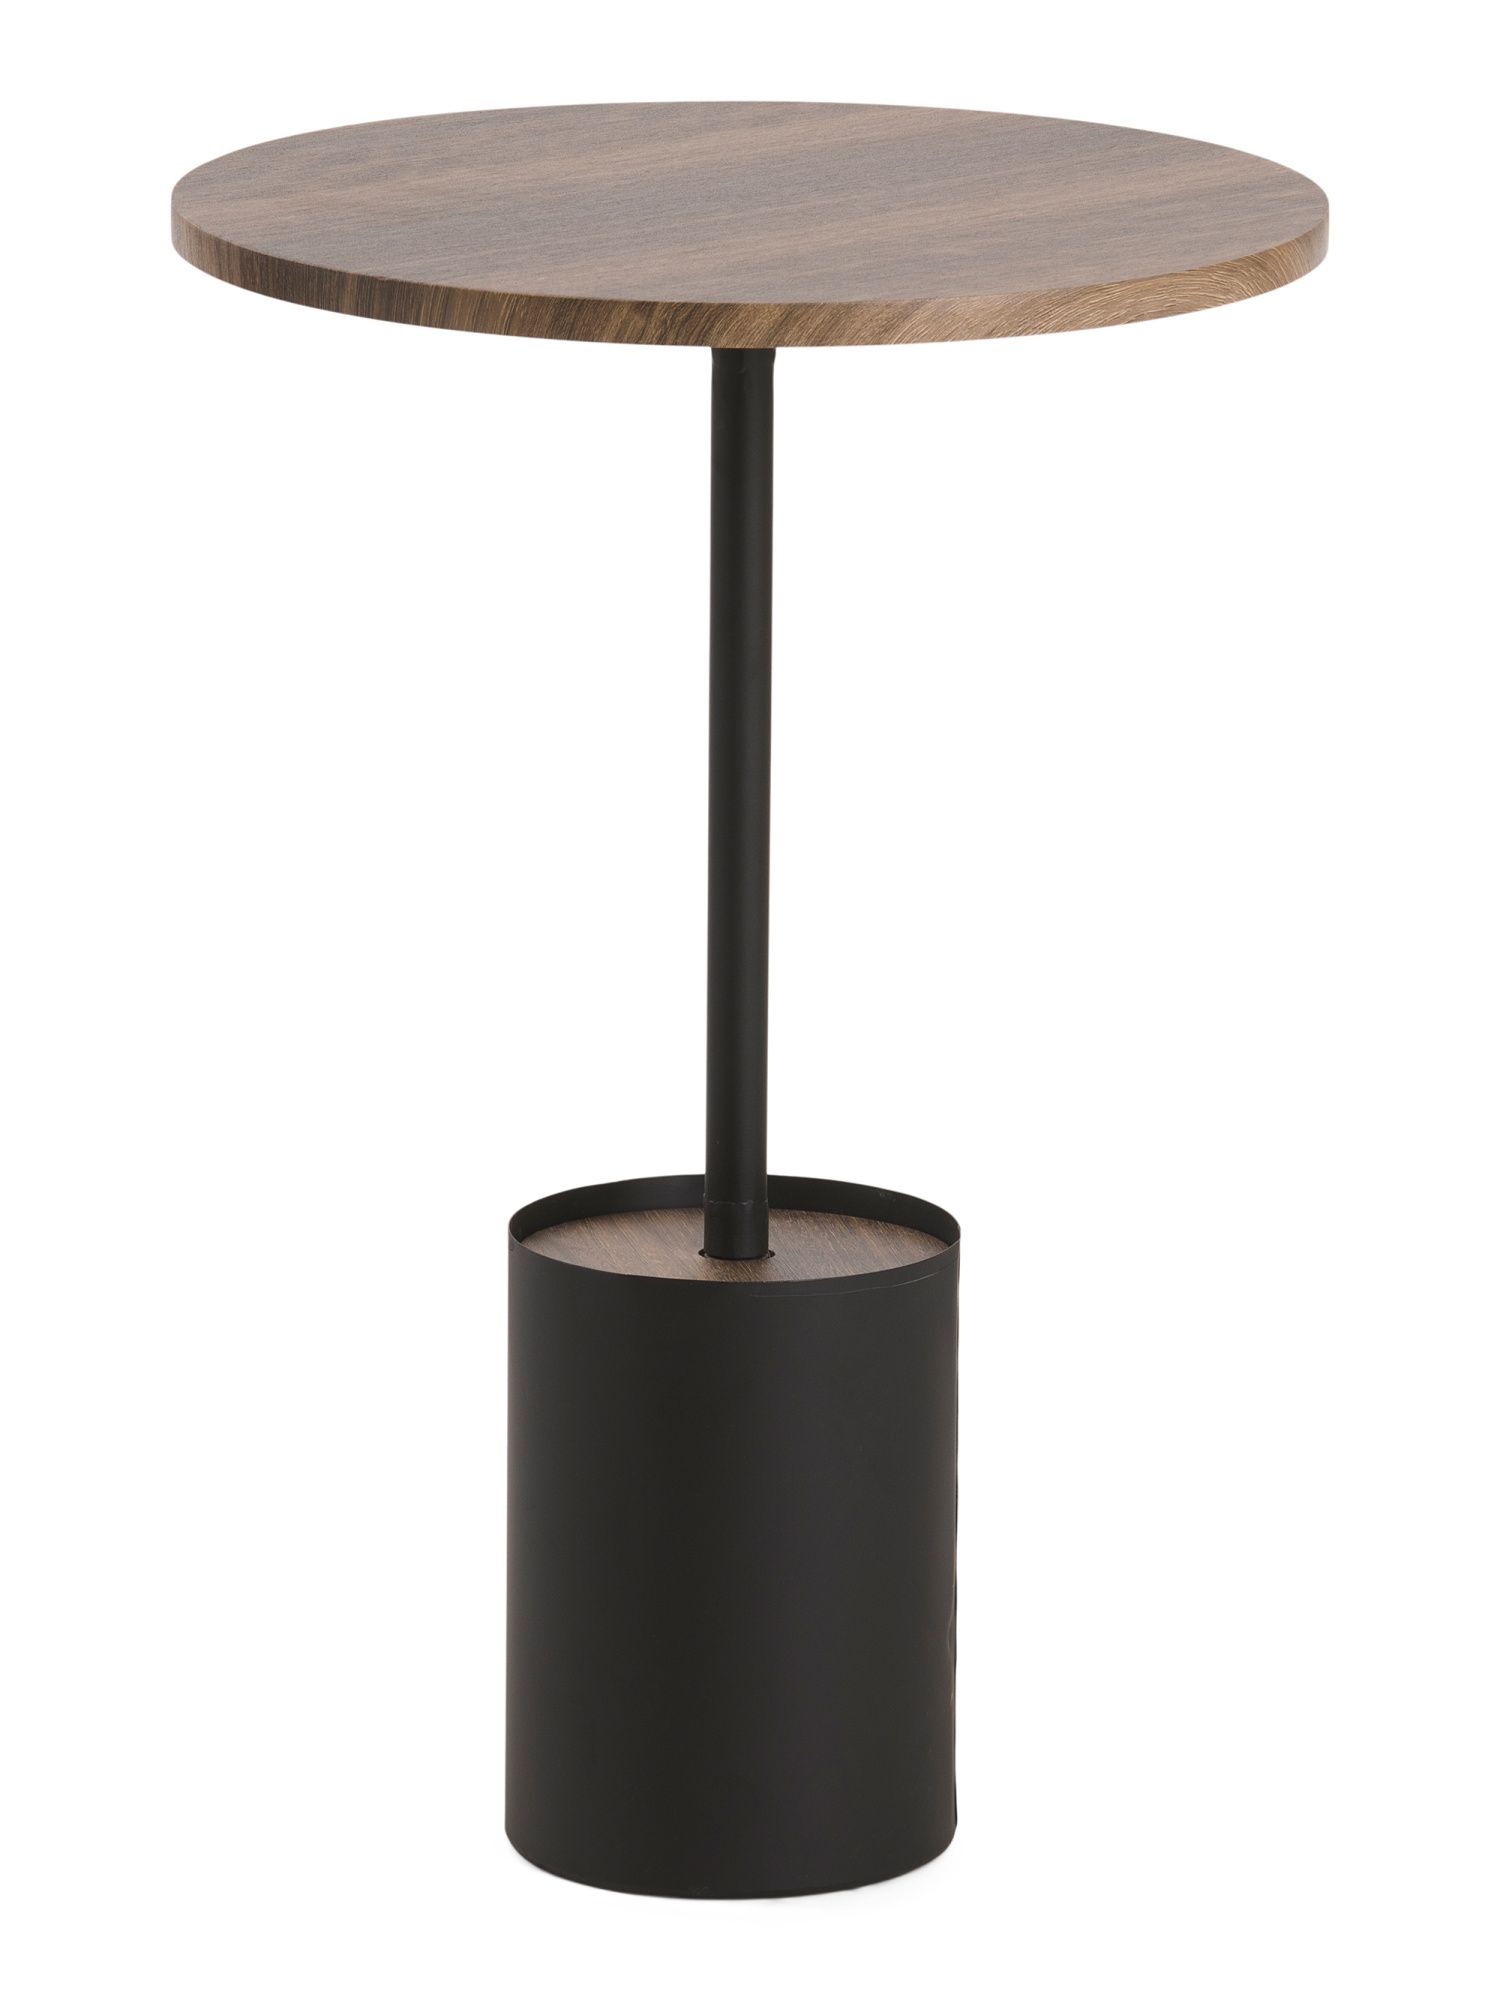 Metal Side Table With Wooden Top | TJ Maxx